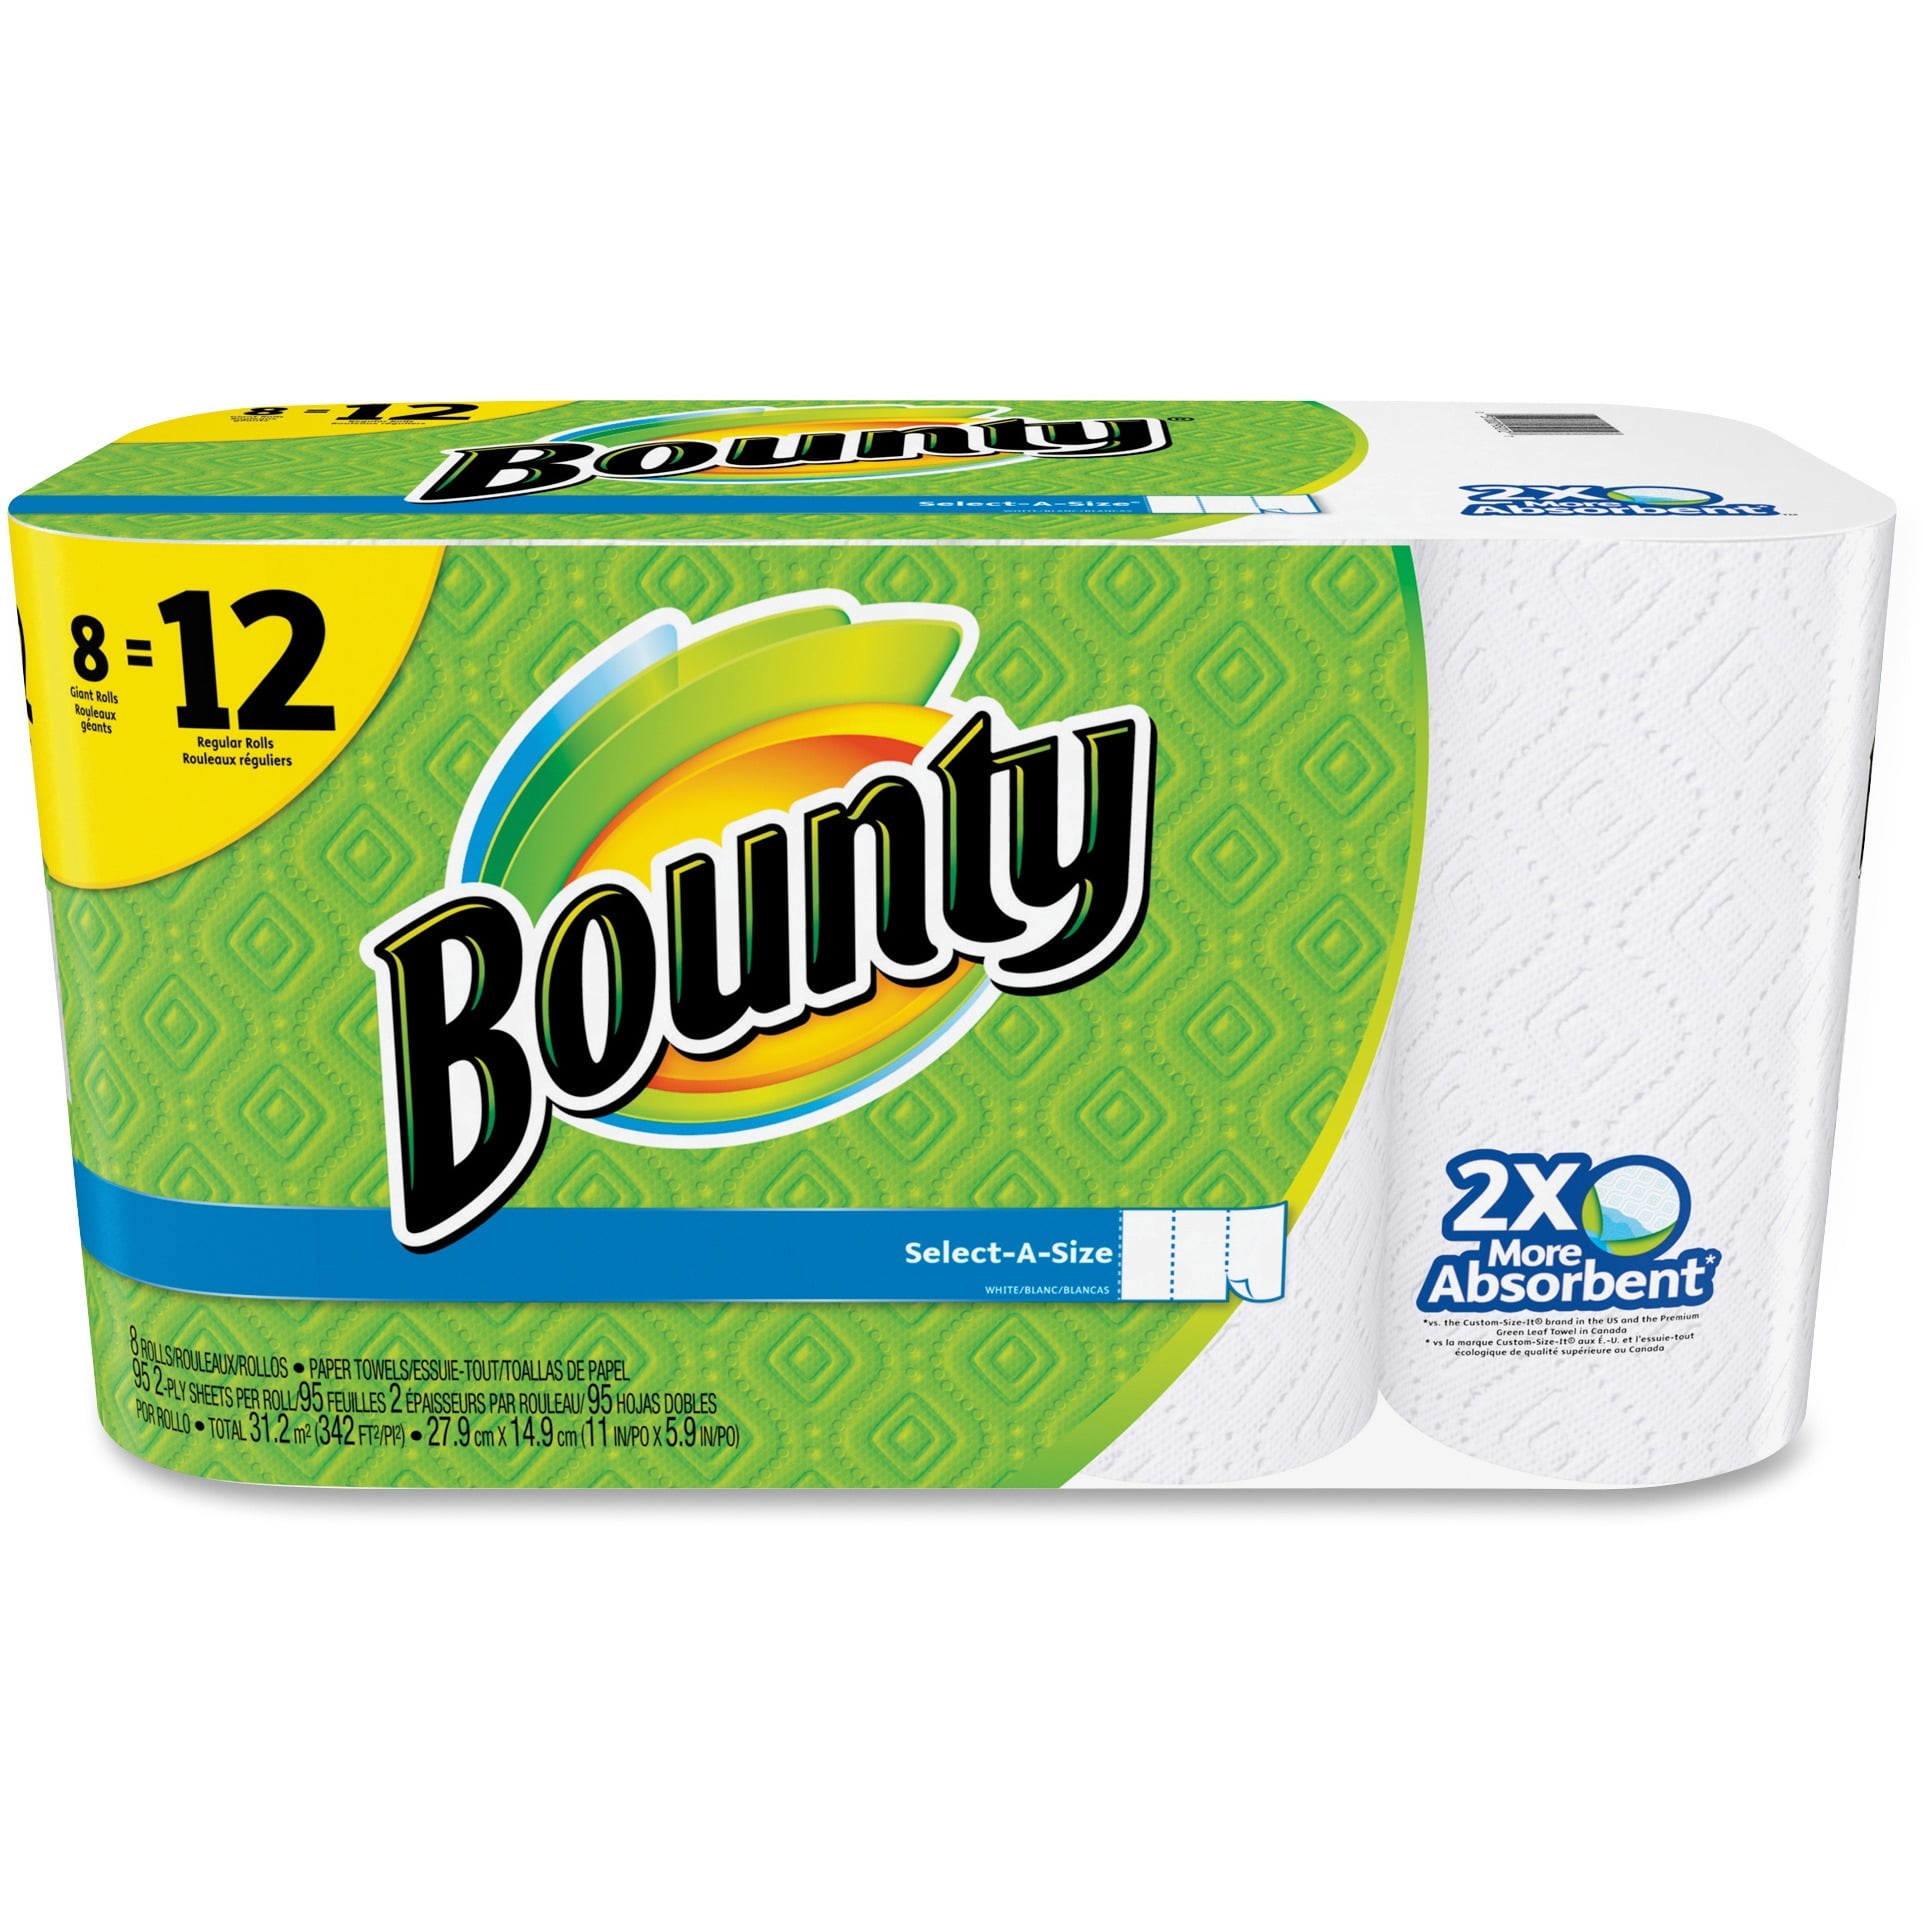 2 Ply Paper Towels Adjust-a-Size Ultra-Strong Super Absorbent 12 Giant Rolls 